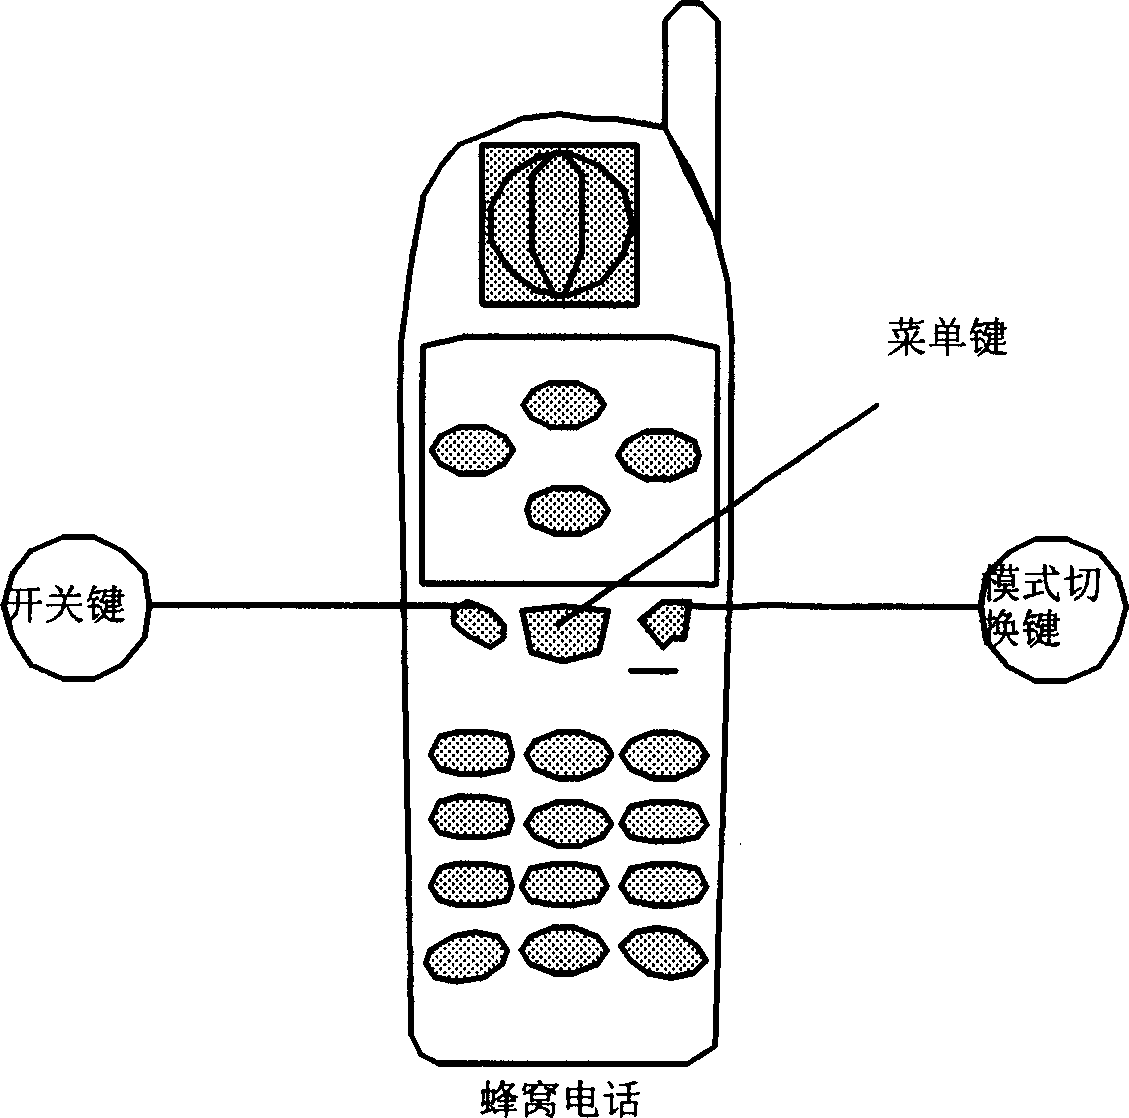 Visual telephone device controlled and displayed by wireless telephone and TV.